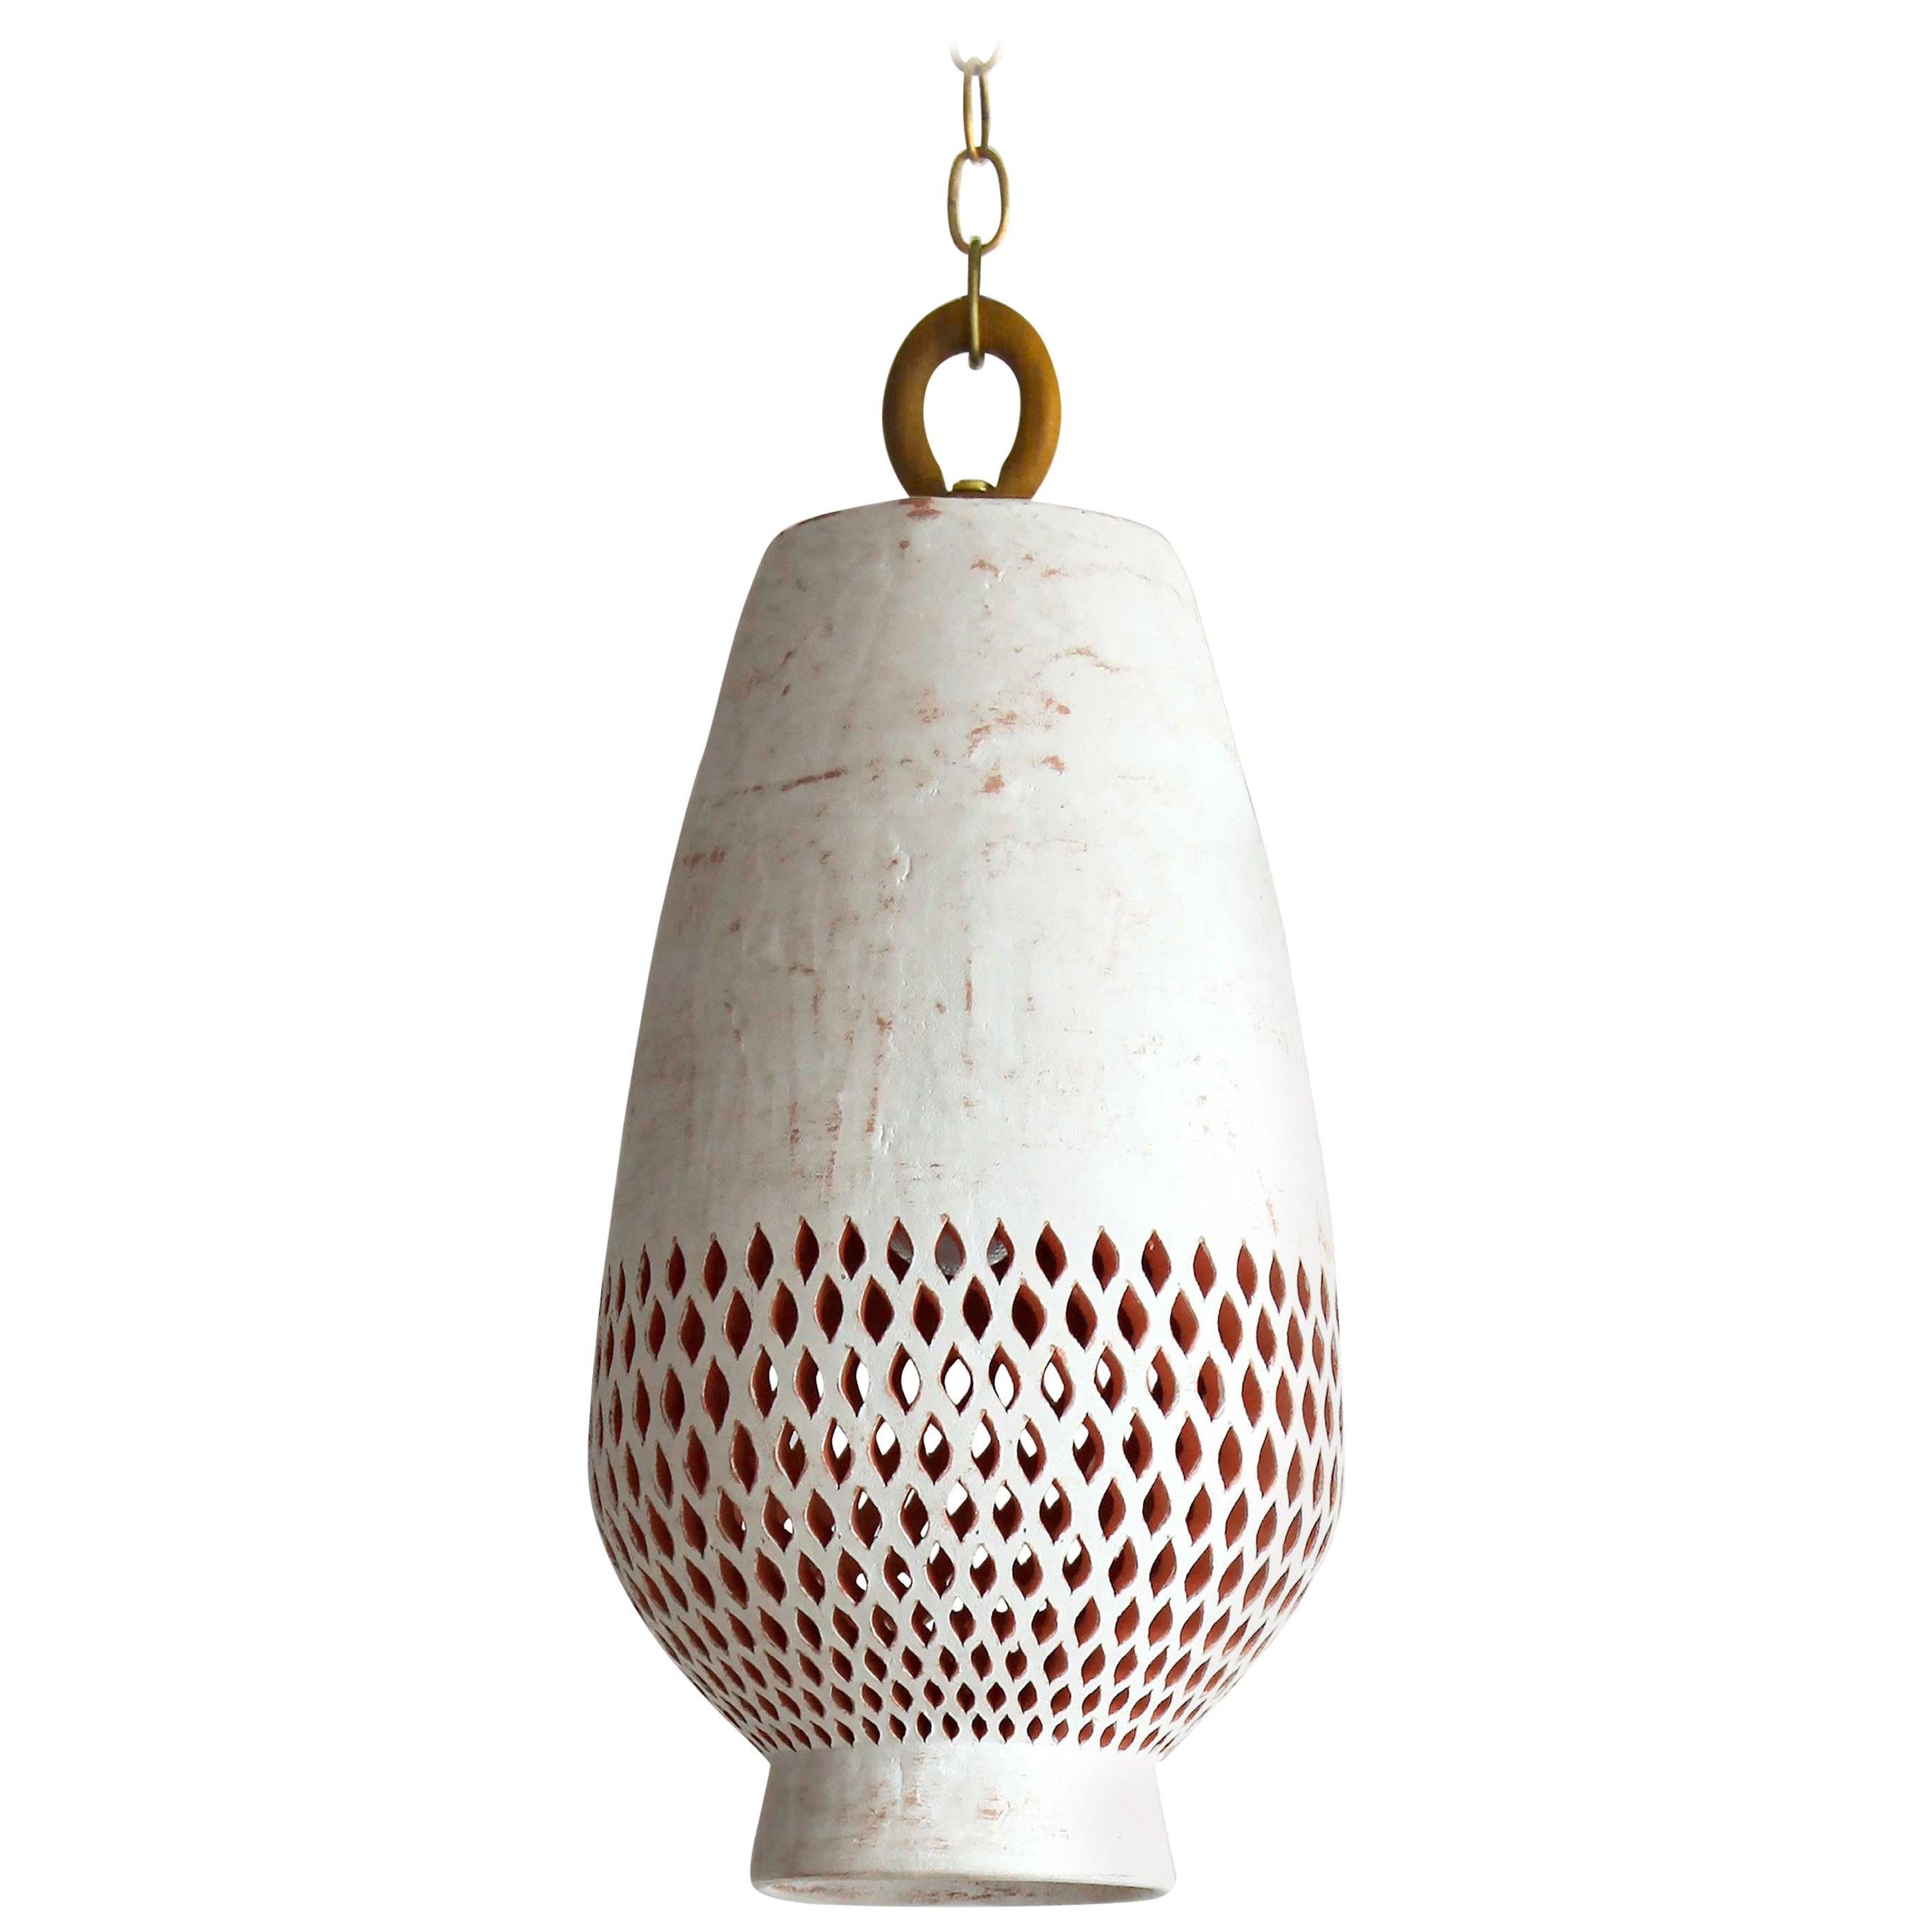 White Ceramic Pendant Light XL, Brushed Brass, Diamantes Atzompa Collection For Sale